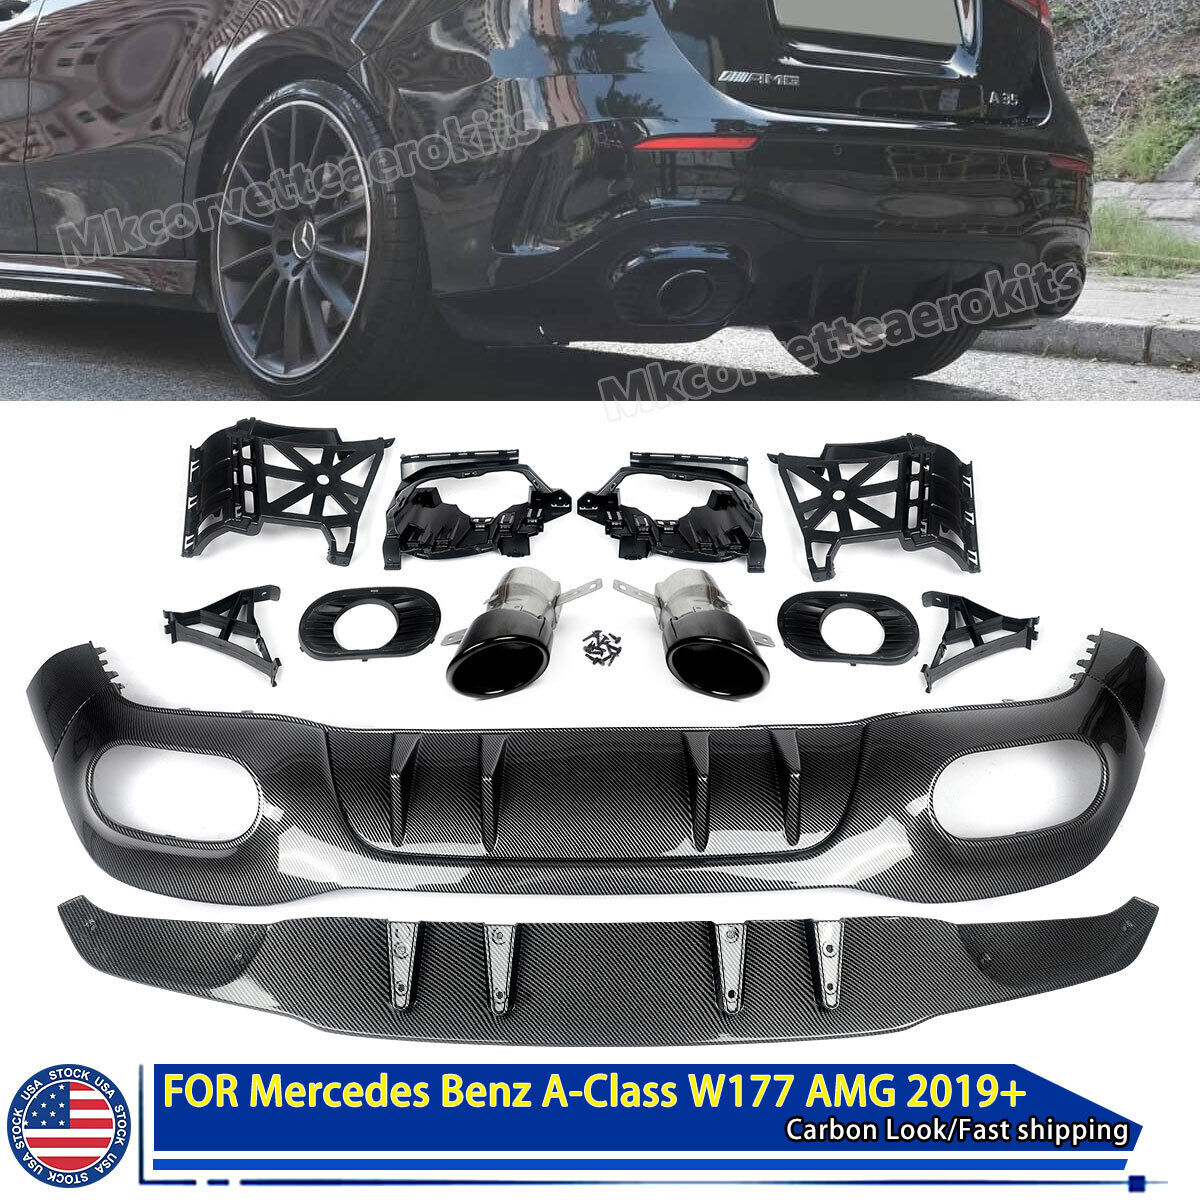 Dual Exhaust For Benz W177 A160 A250 A35 AMG Rear Diffuser Lip Carbon Look 2019+